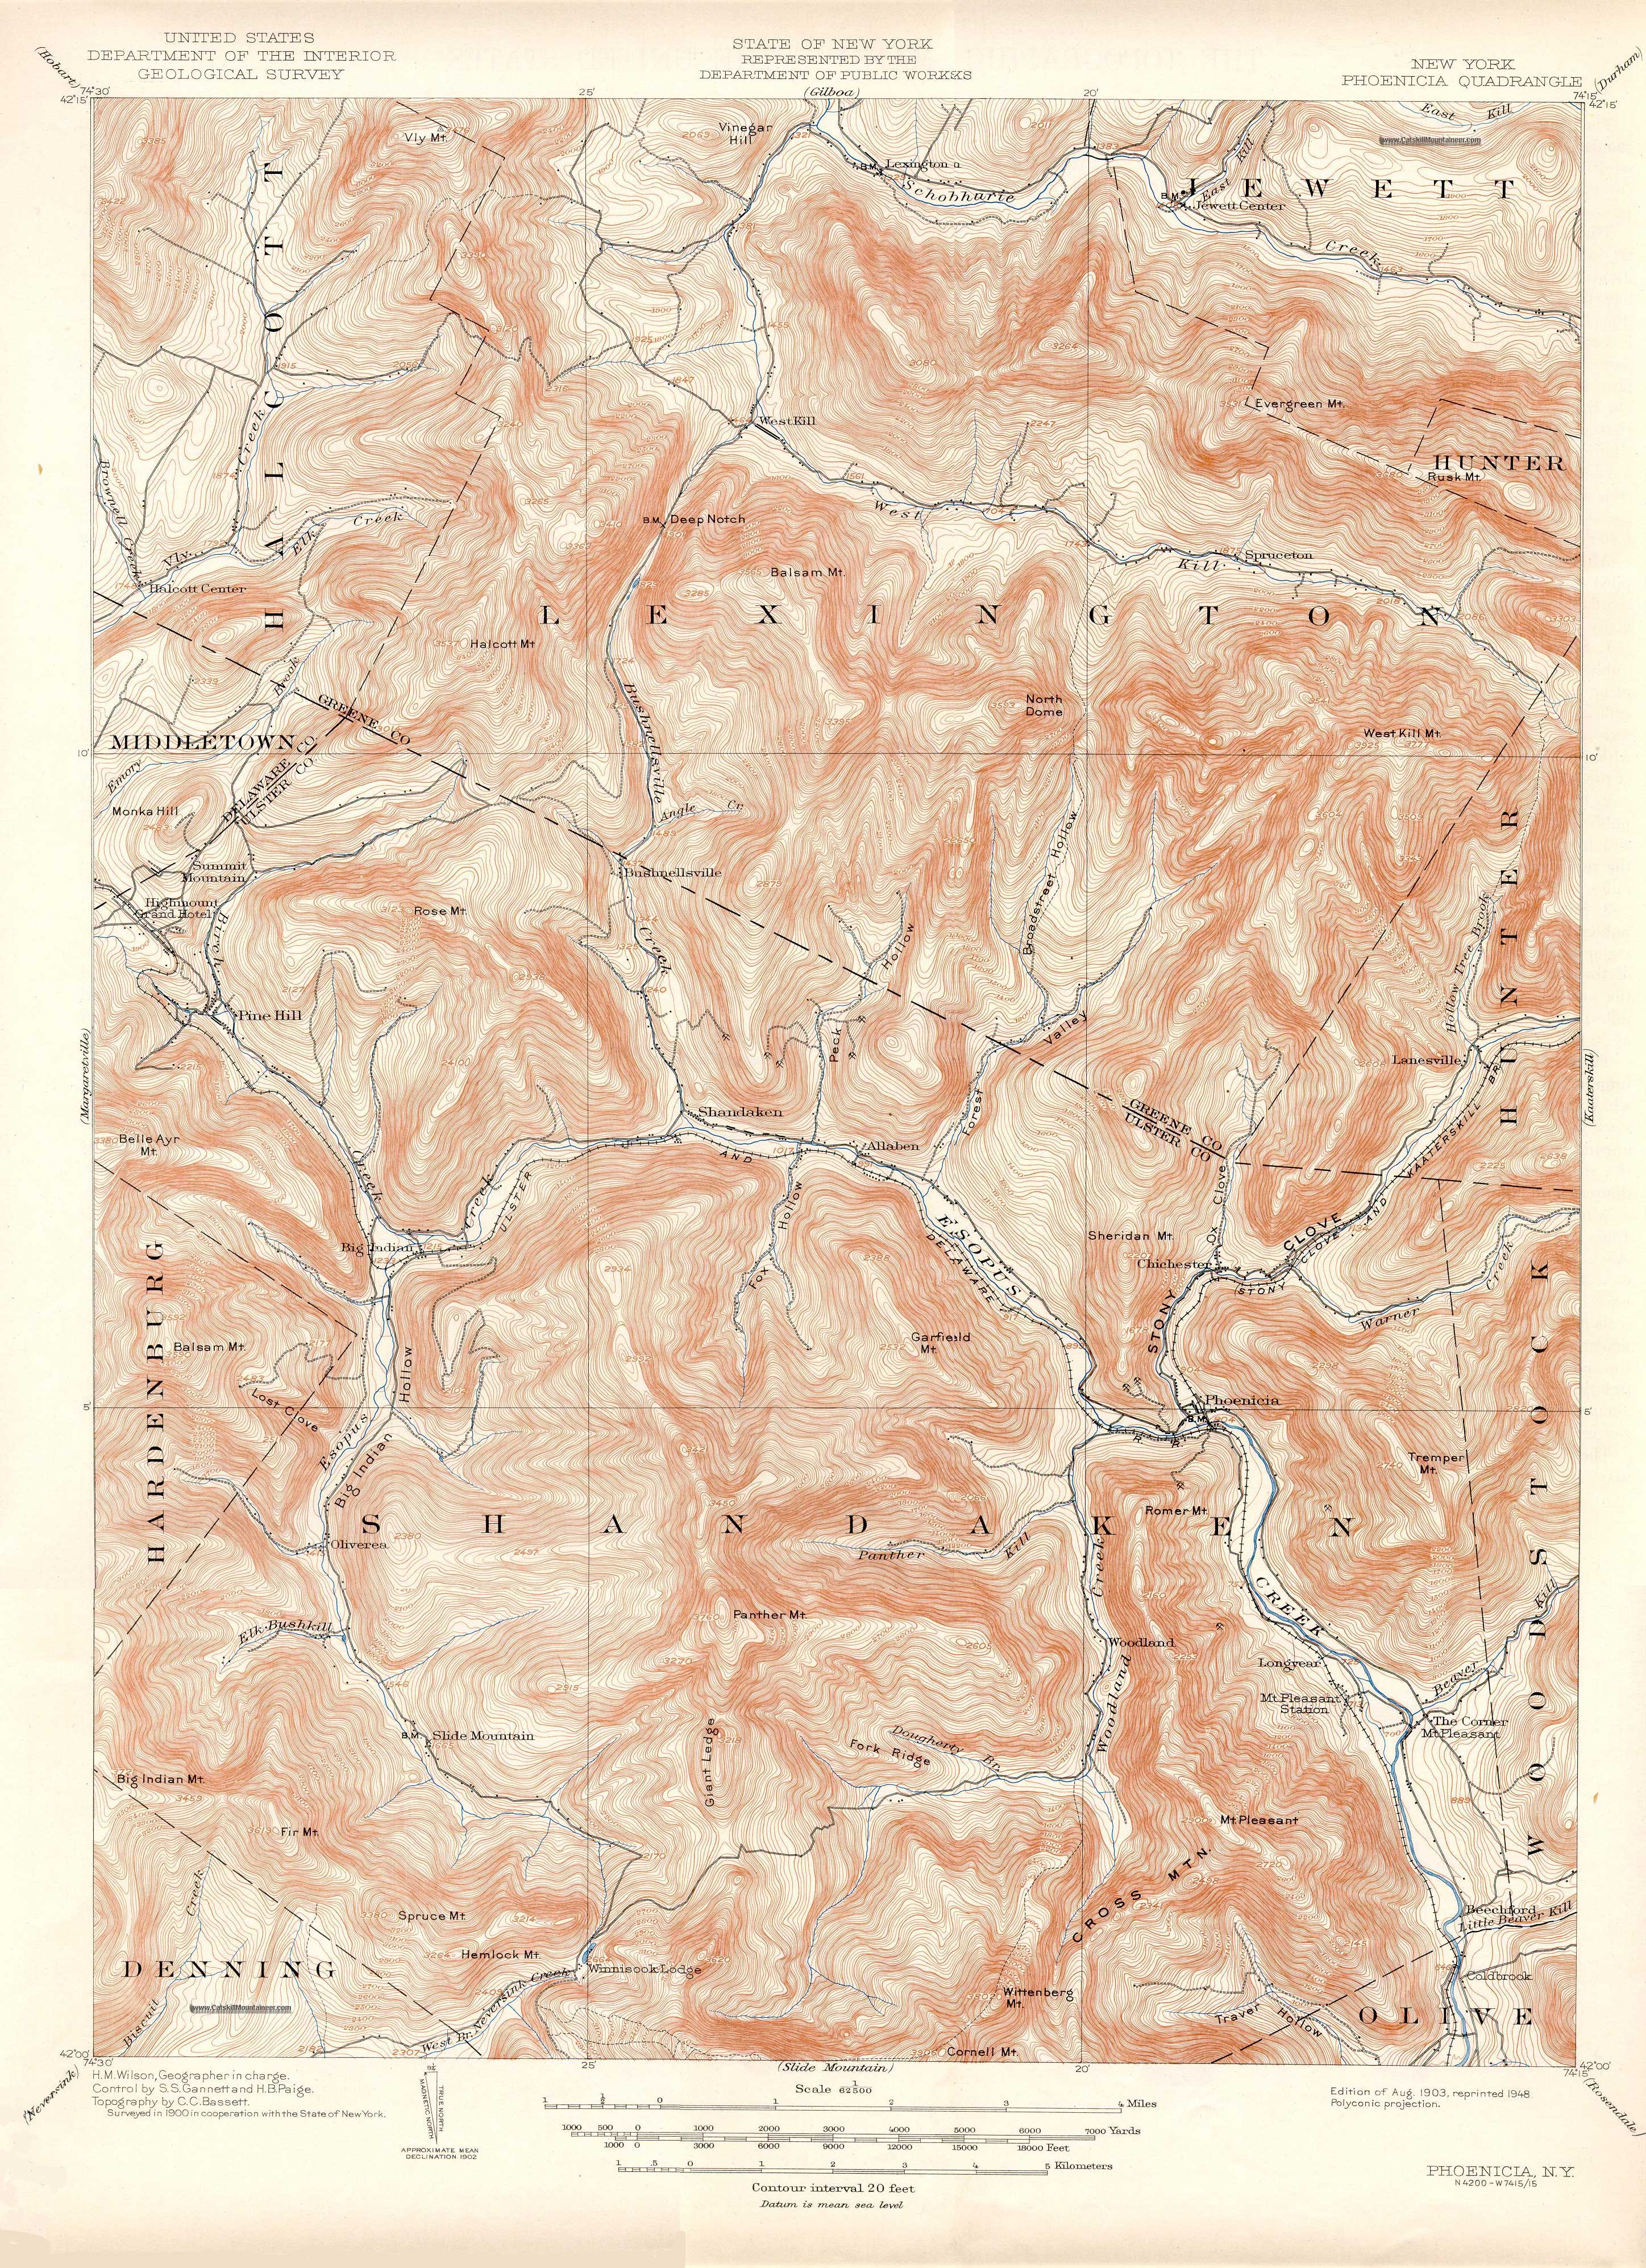 1903 USGS topographical map of Phoenicia